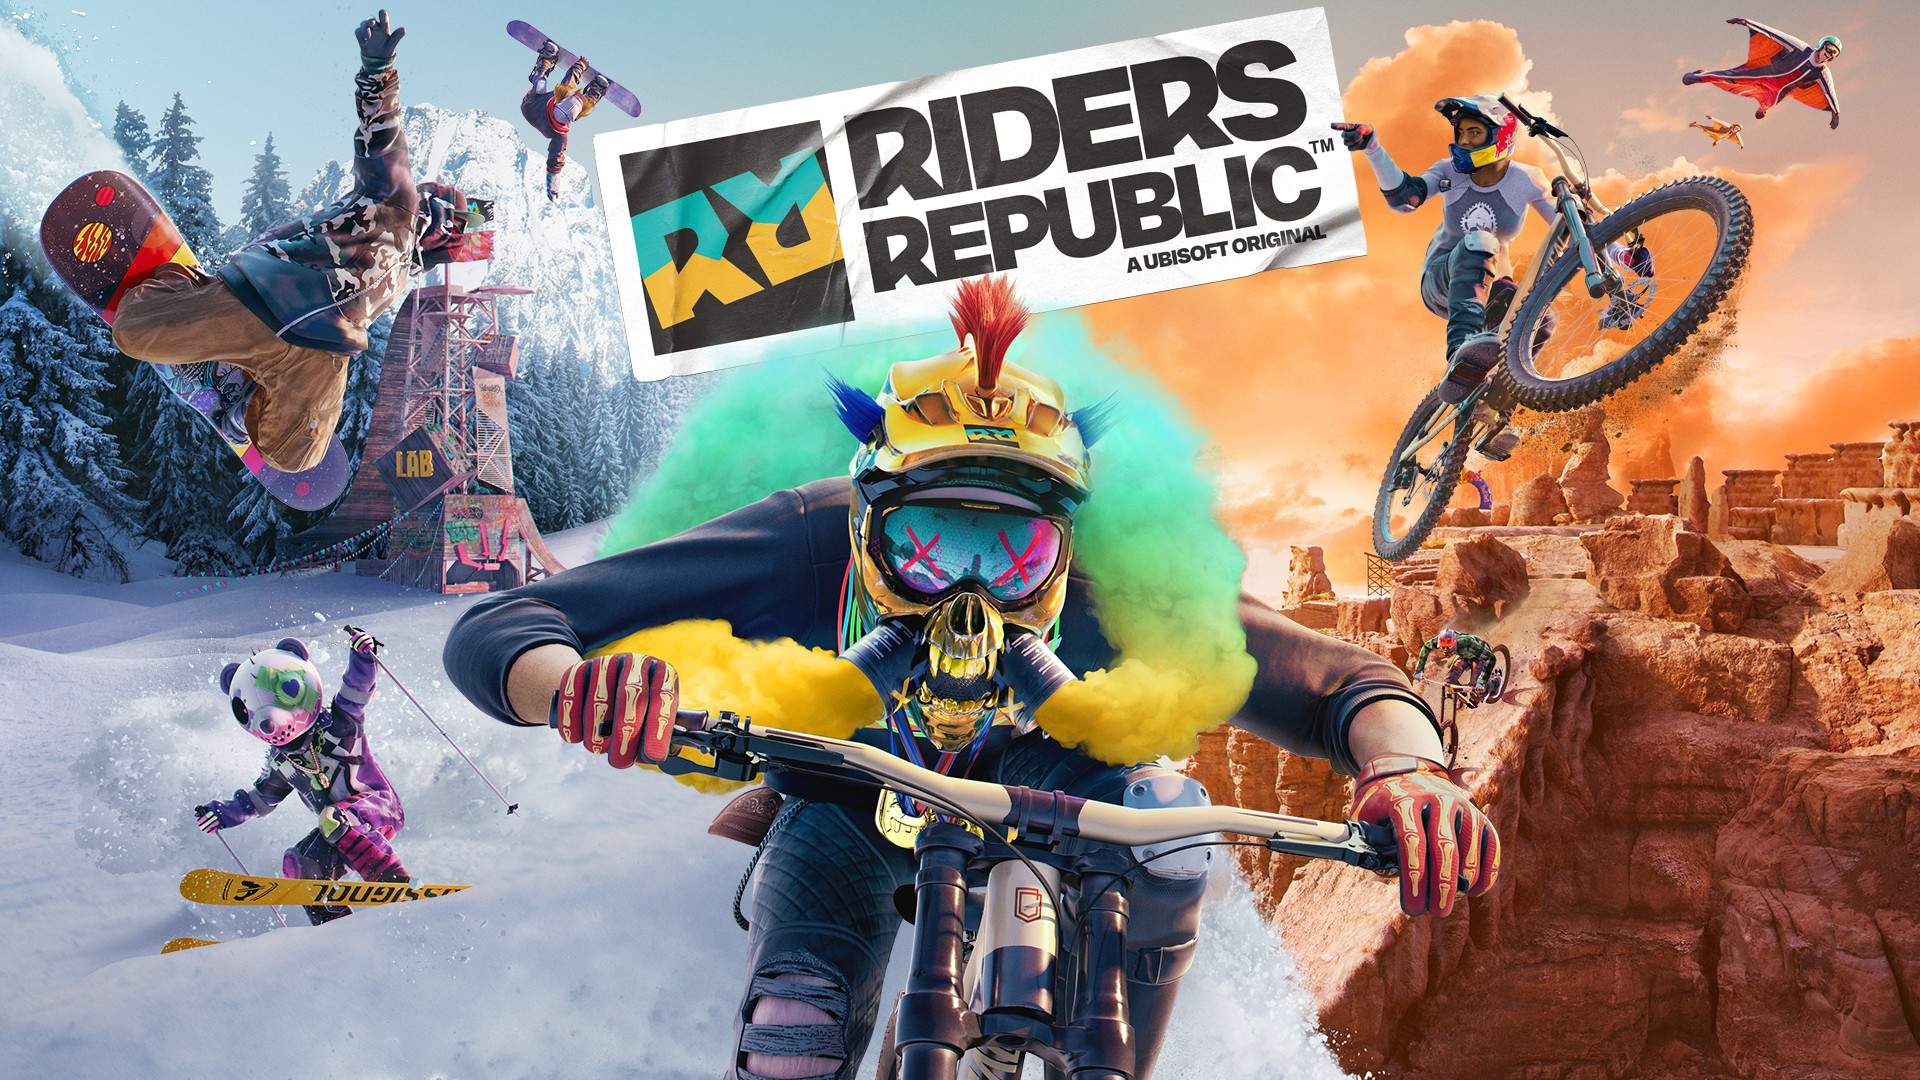 https://s1.cdn.autoevolution.com/images/news/riders-republic-review-setting-new-standards-for-extreme-sports-games-ps5-175236_1.jpg